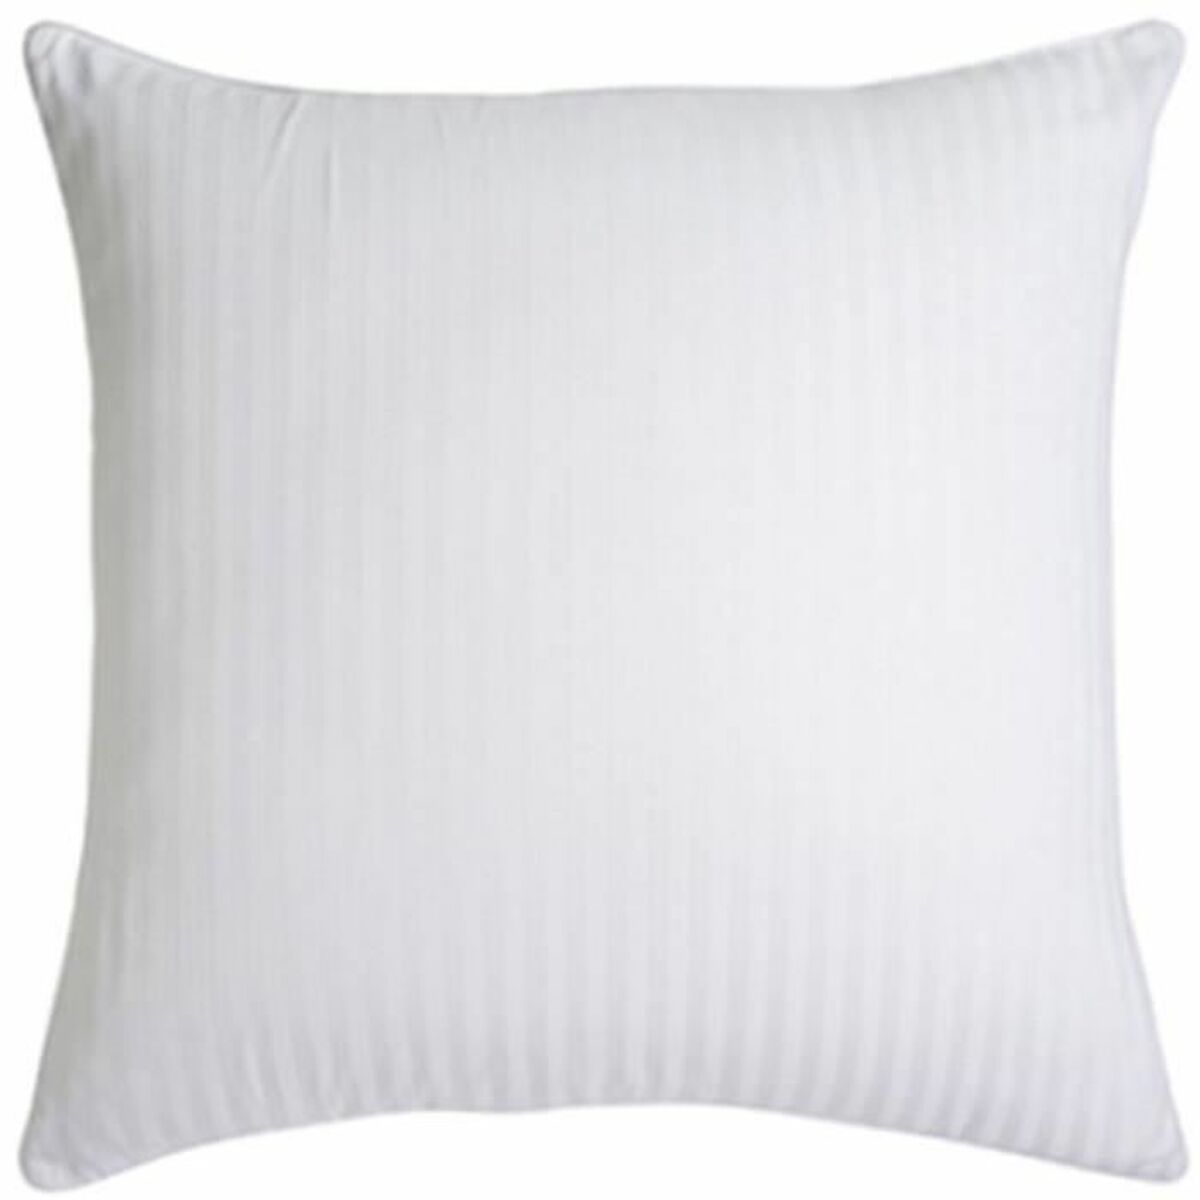 Pillow Toison D'or